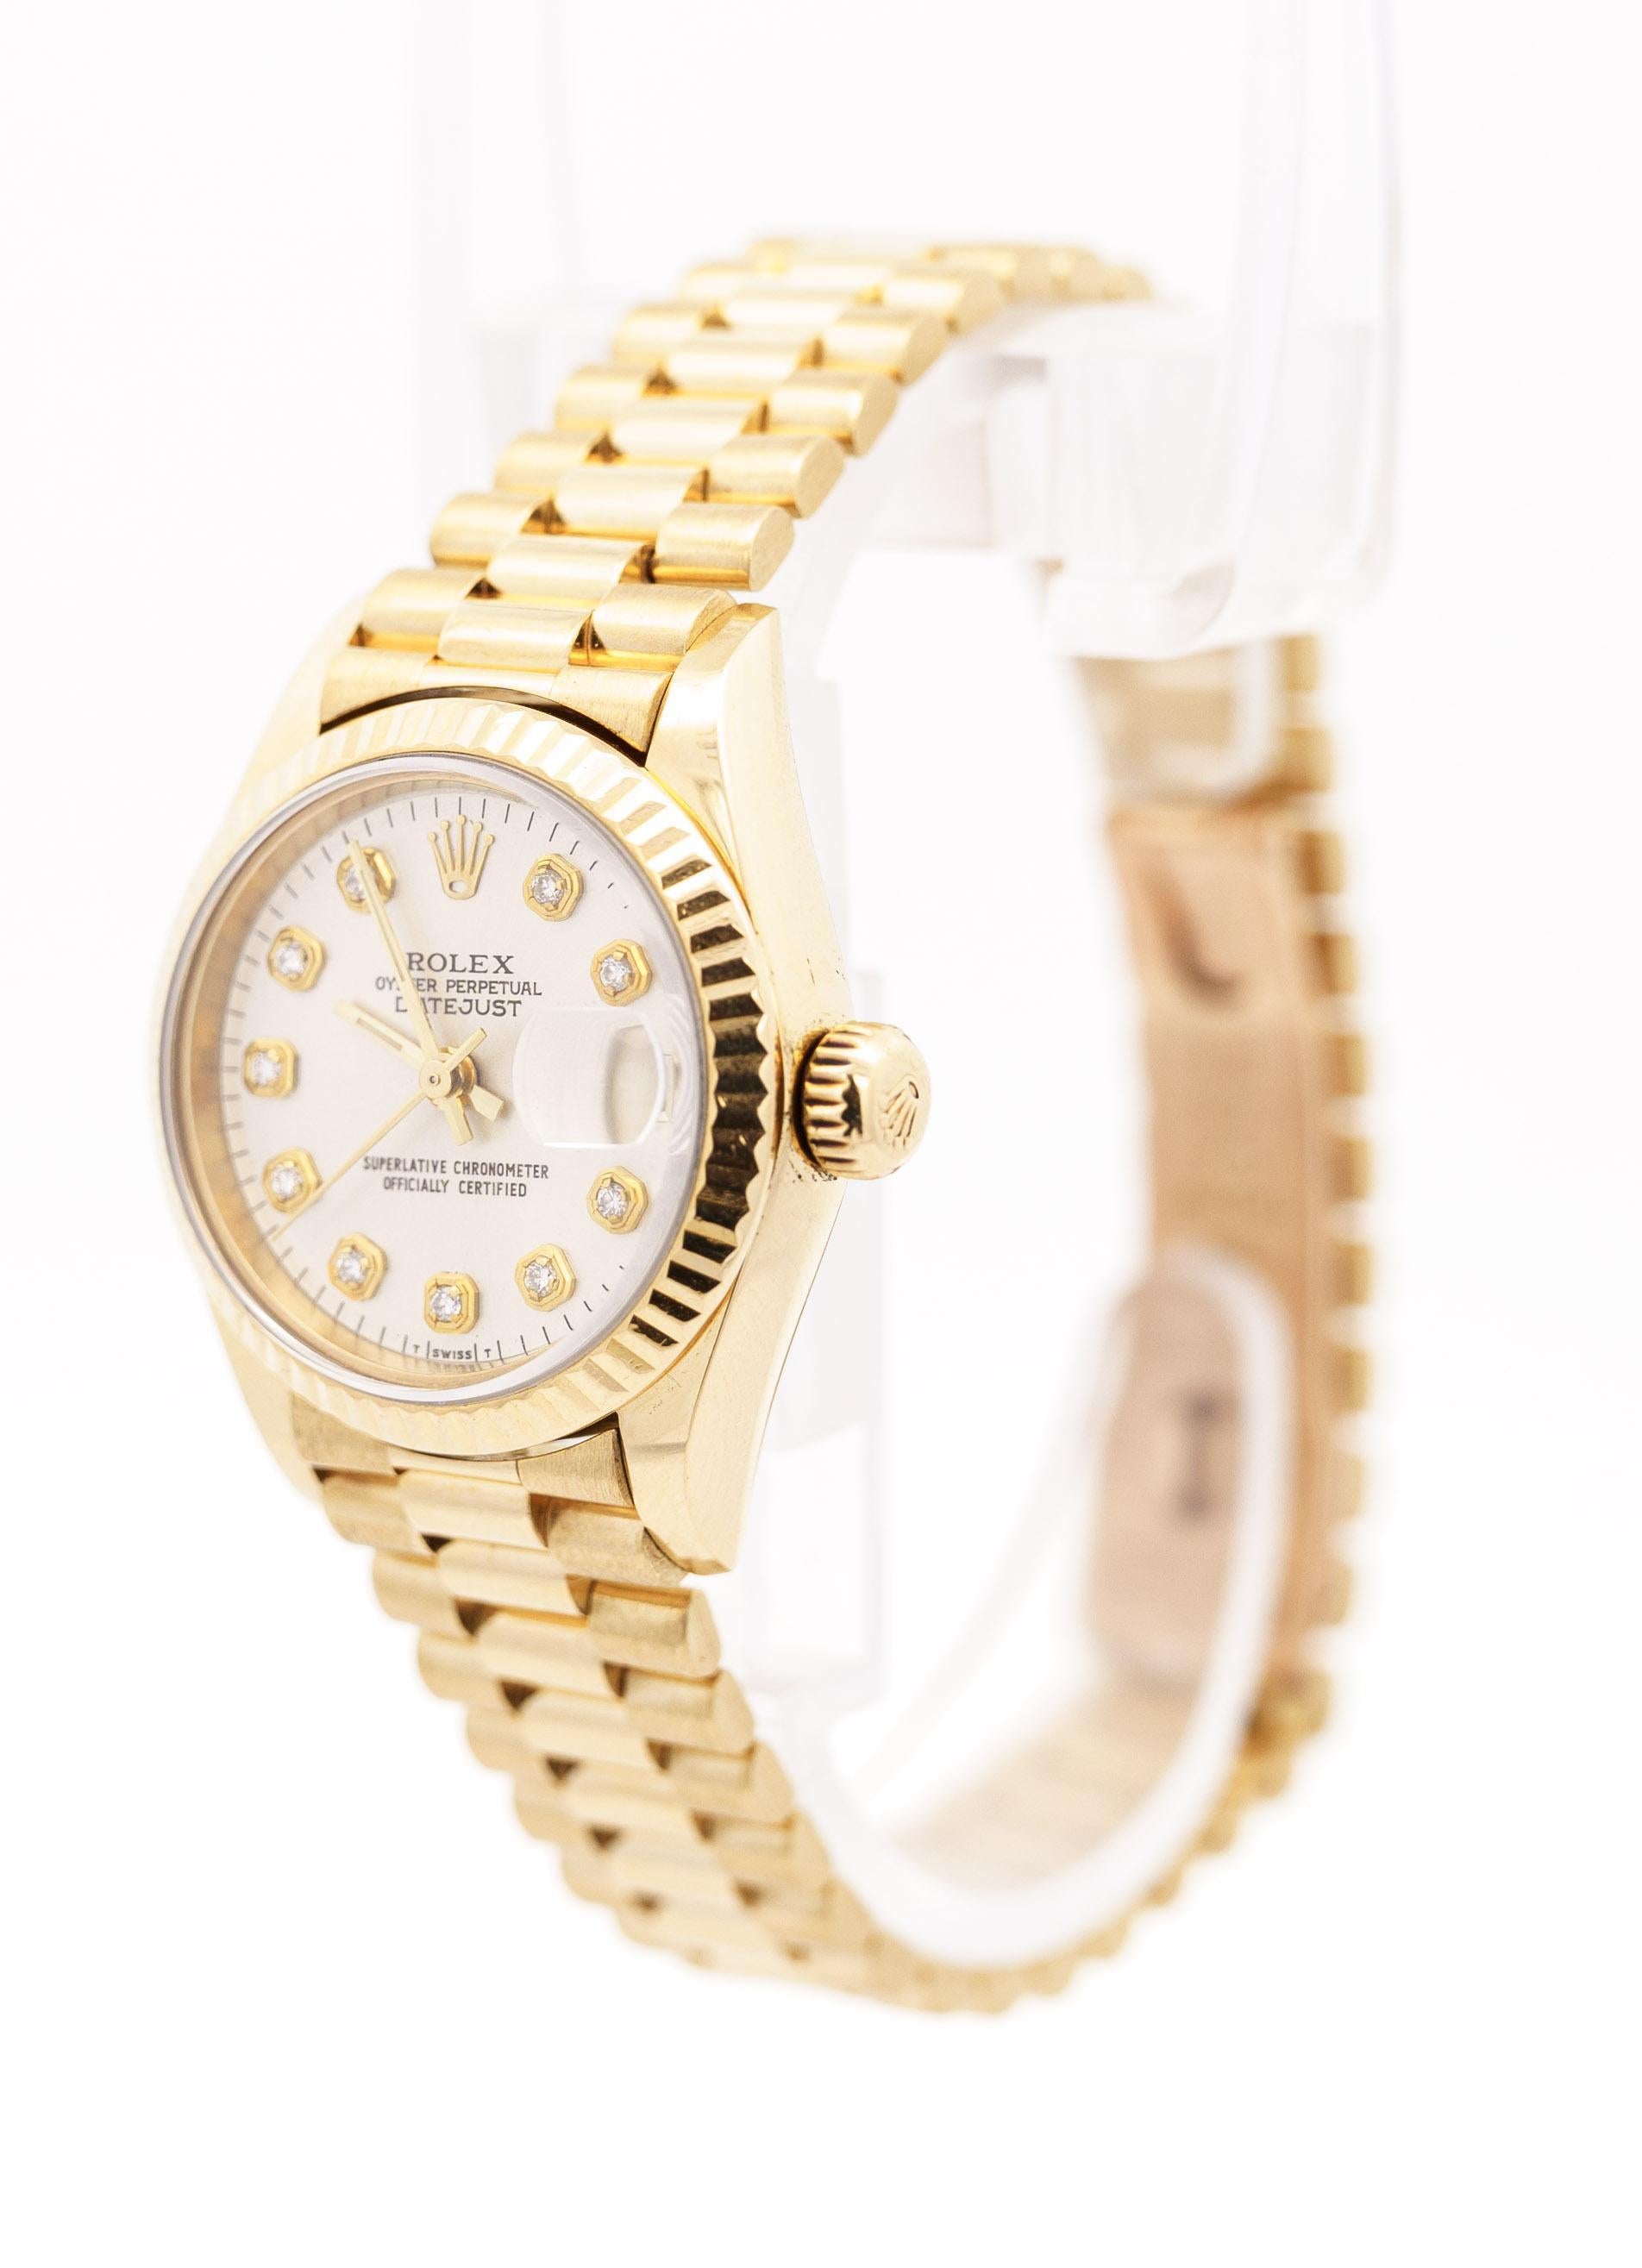 how much is a gold rolex watch